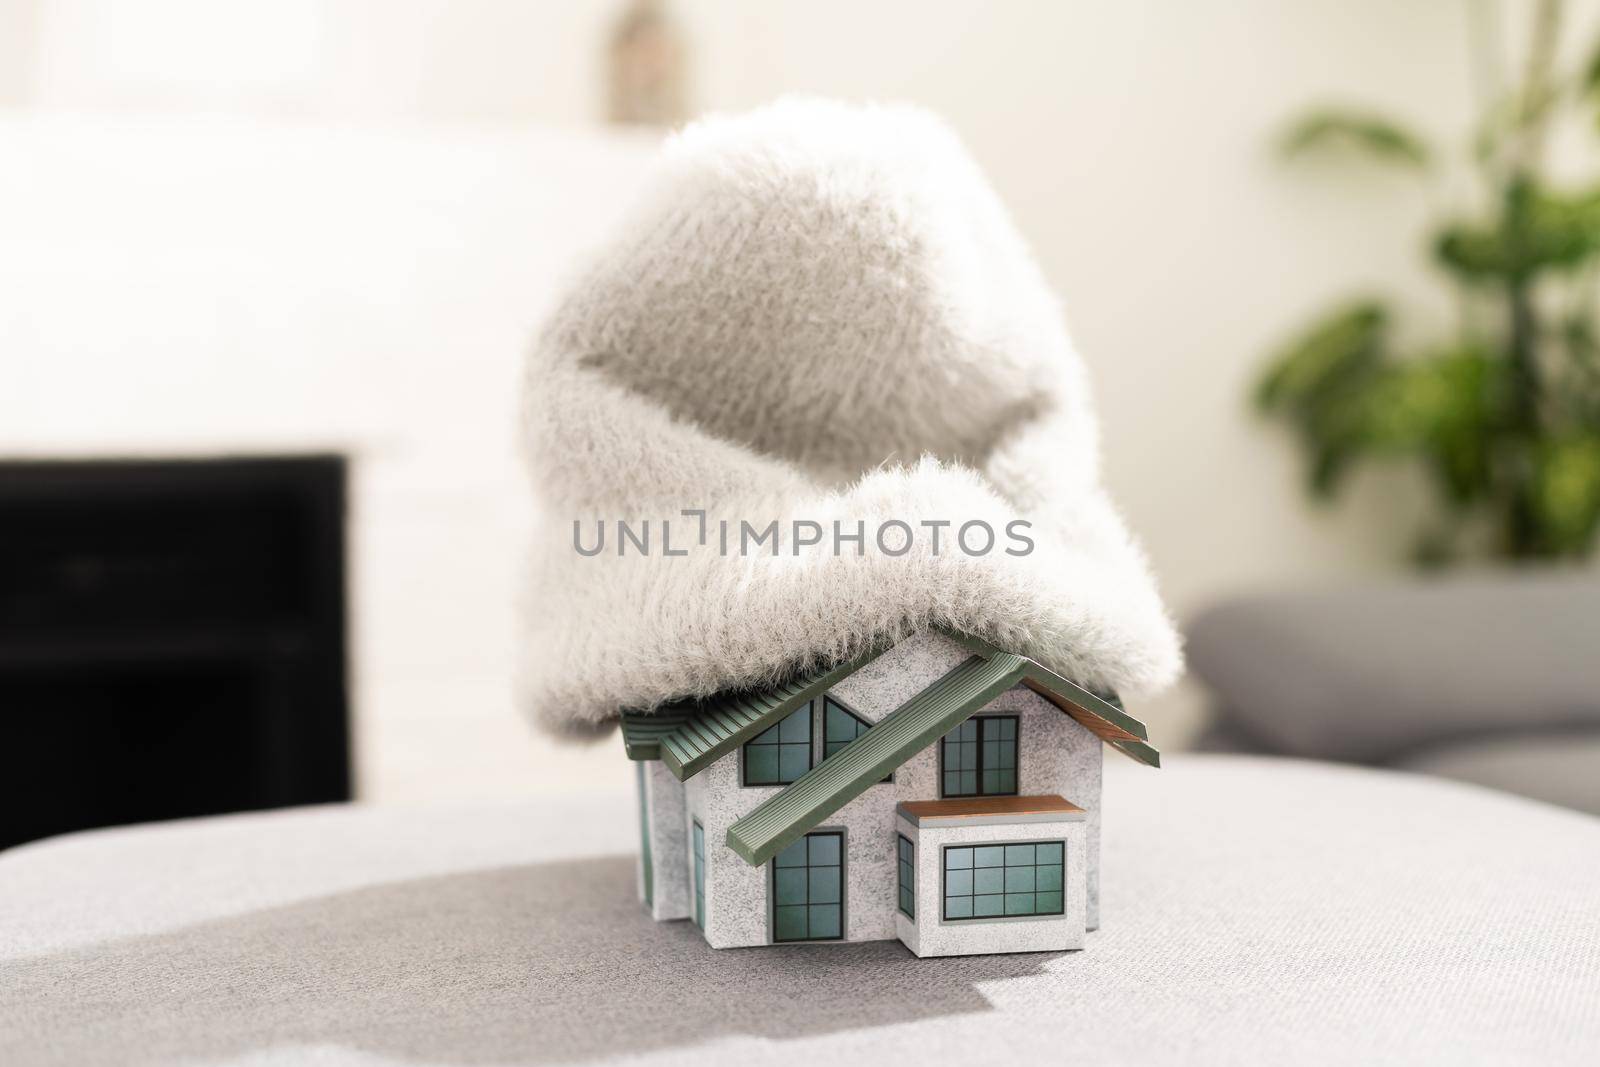 model of a house with a hat by Andelov13